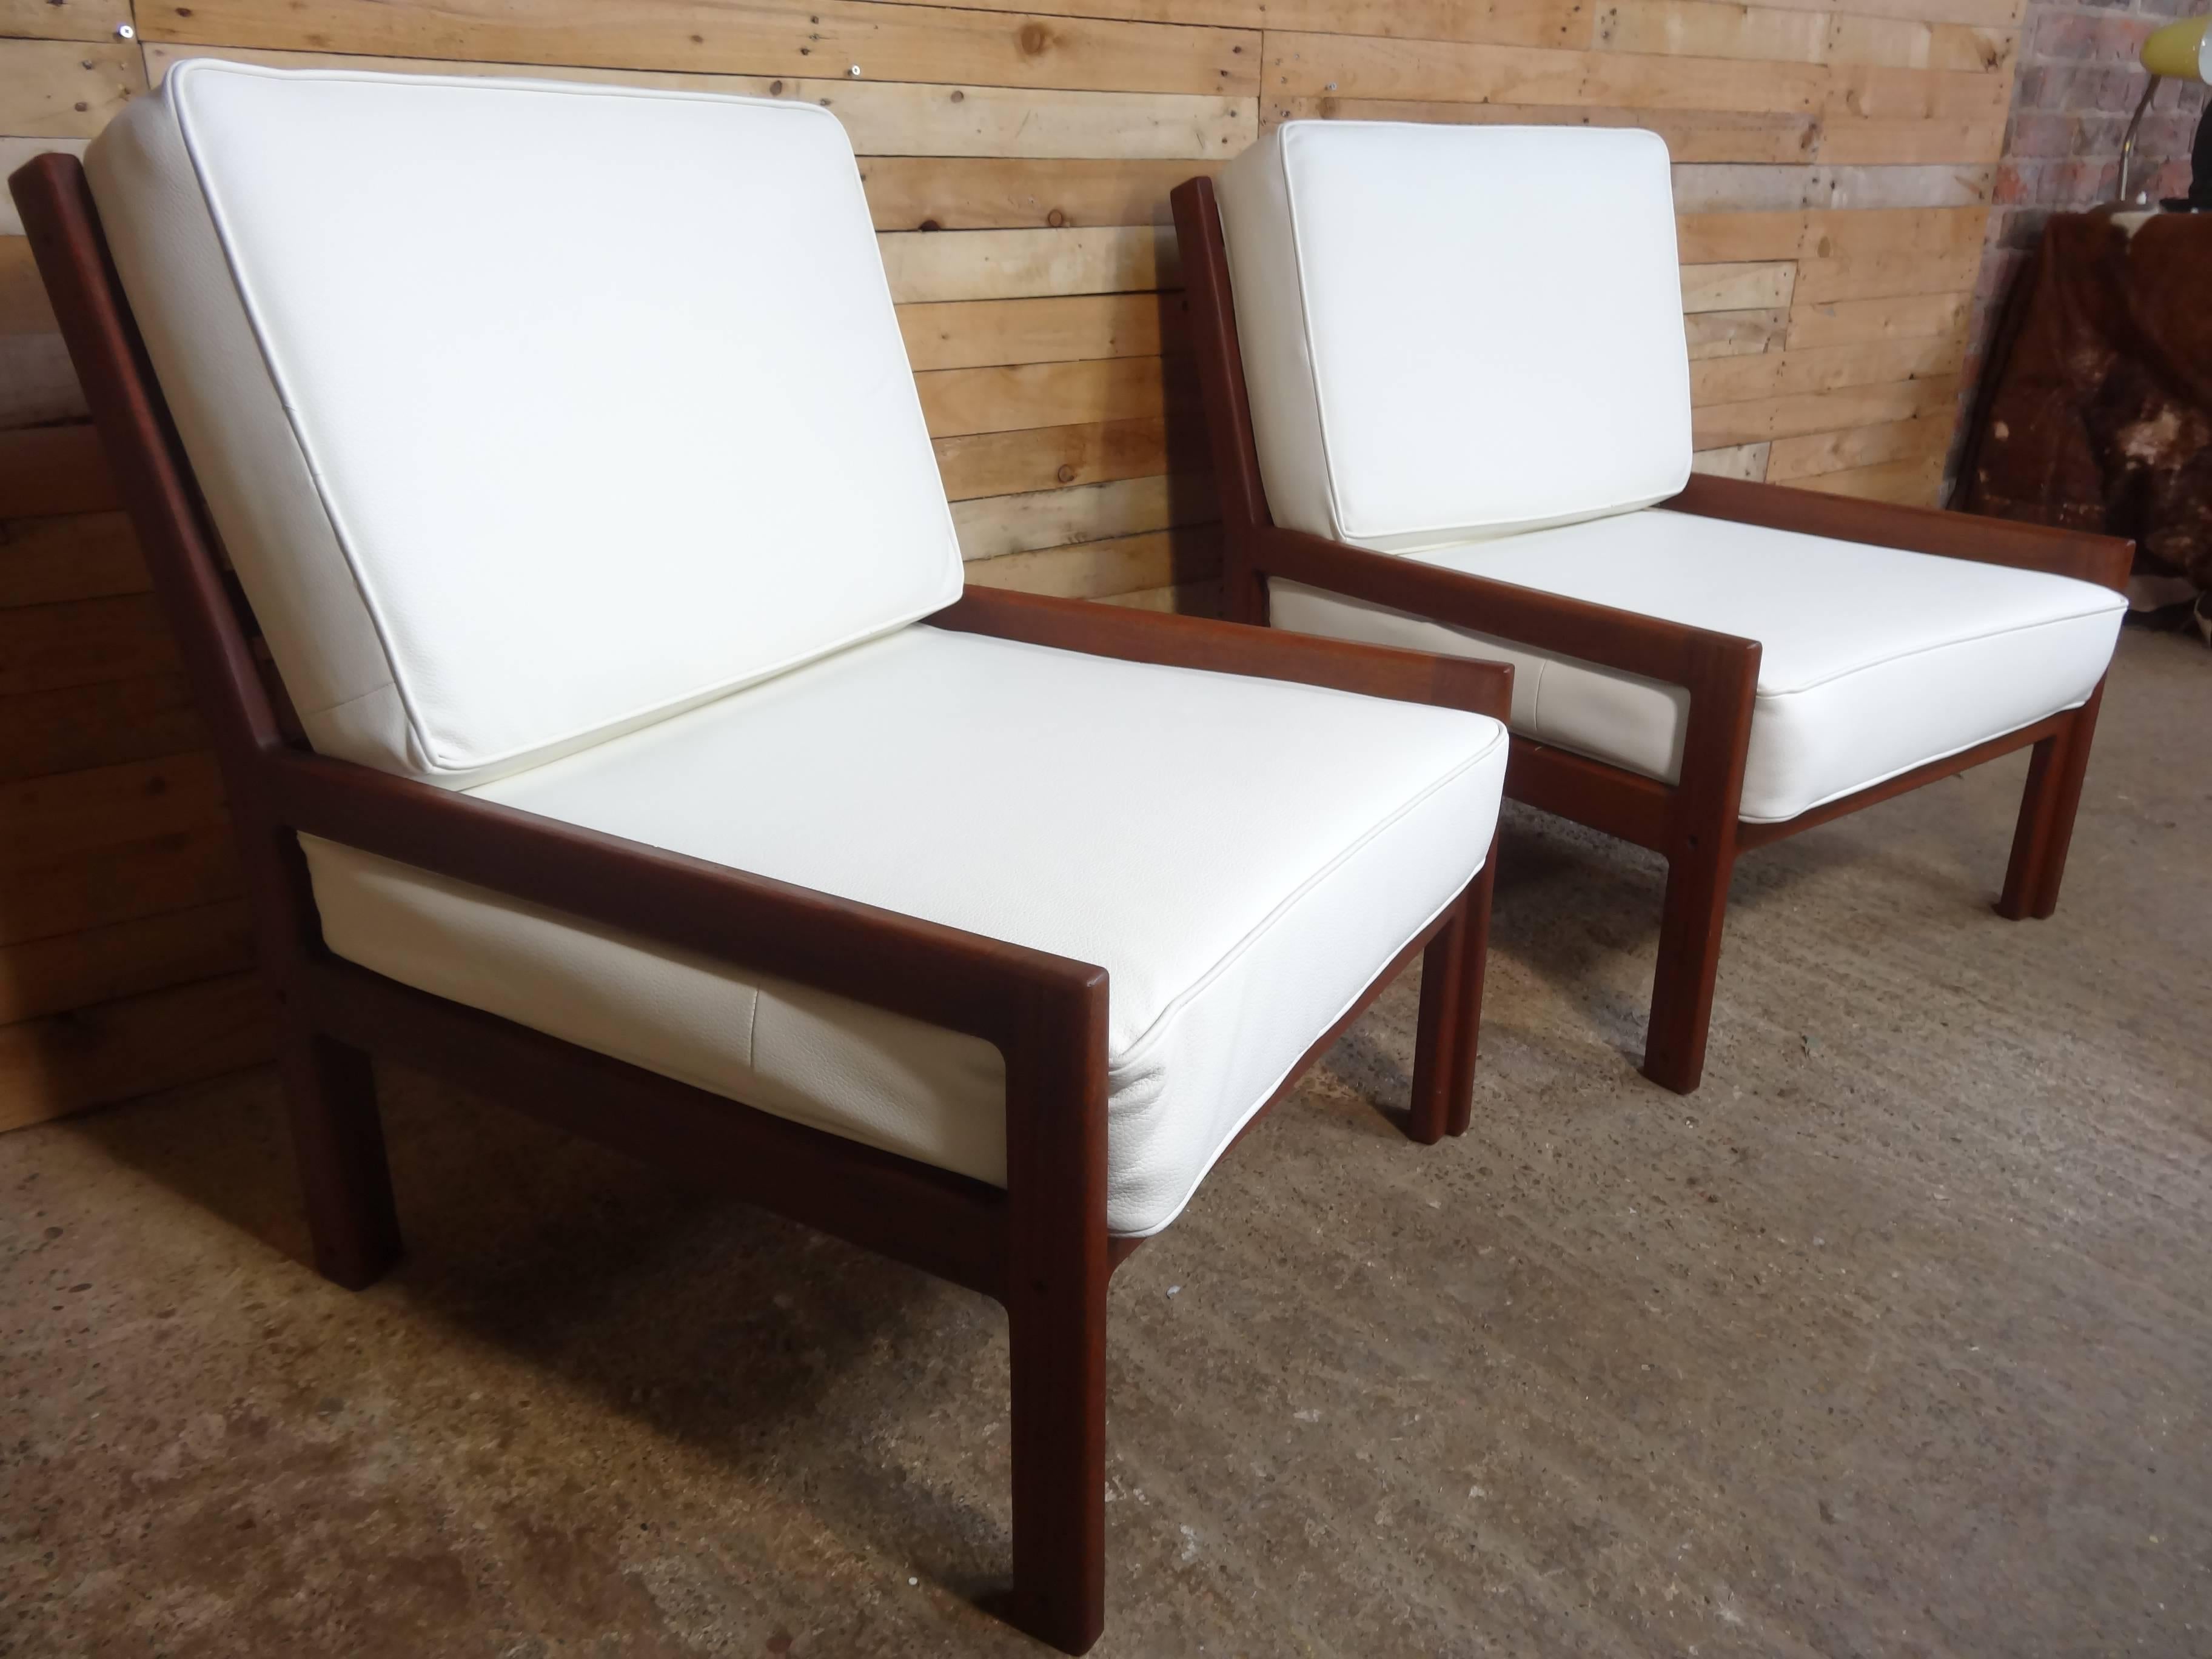 1960 Set of Retro White Leather Minimalistic Teak Lounge Chairs For Sale 1